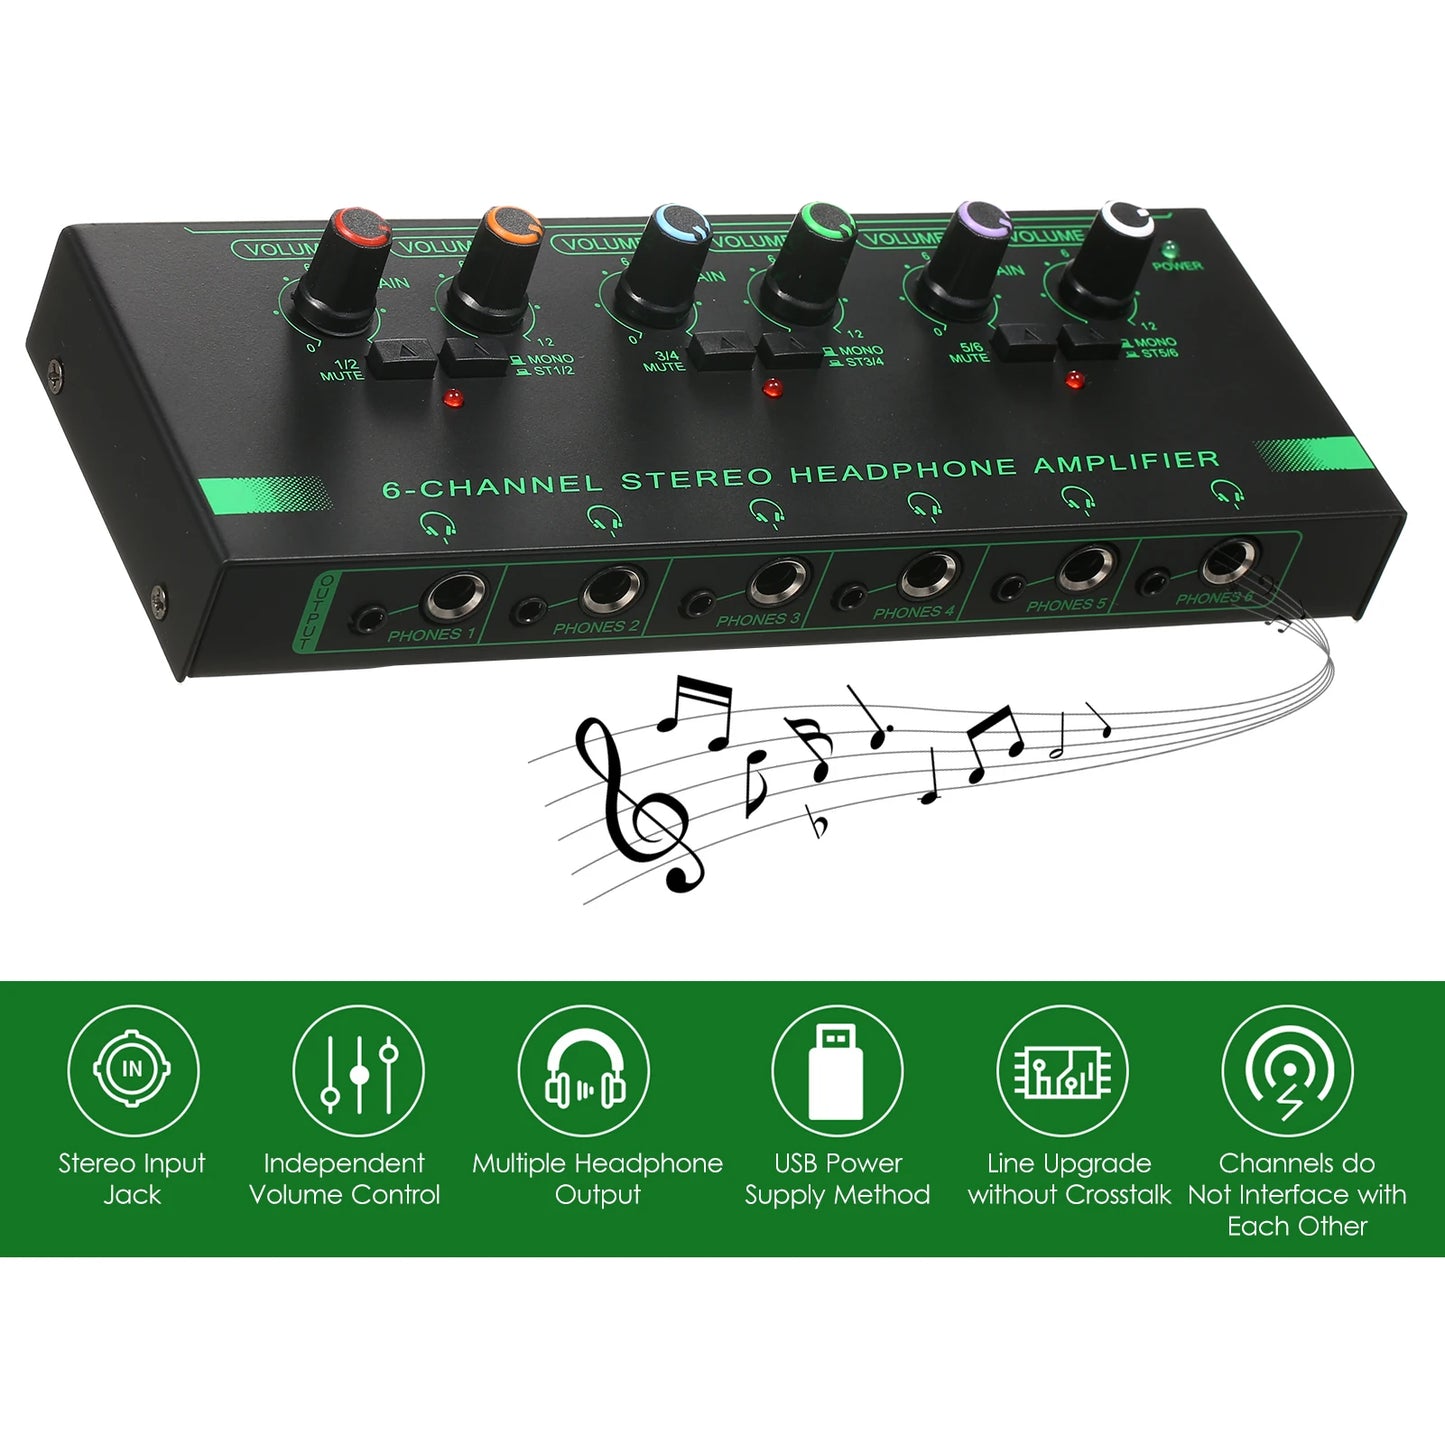 6-Channel Stereo Headphone Amplifier Compact Mini Audio Stereo